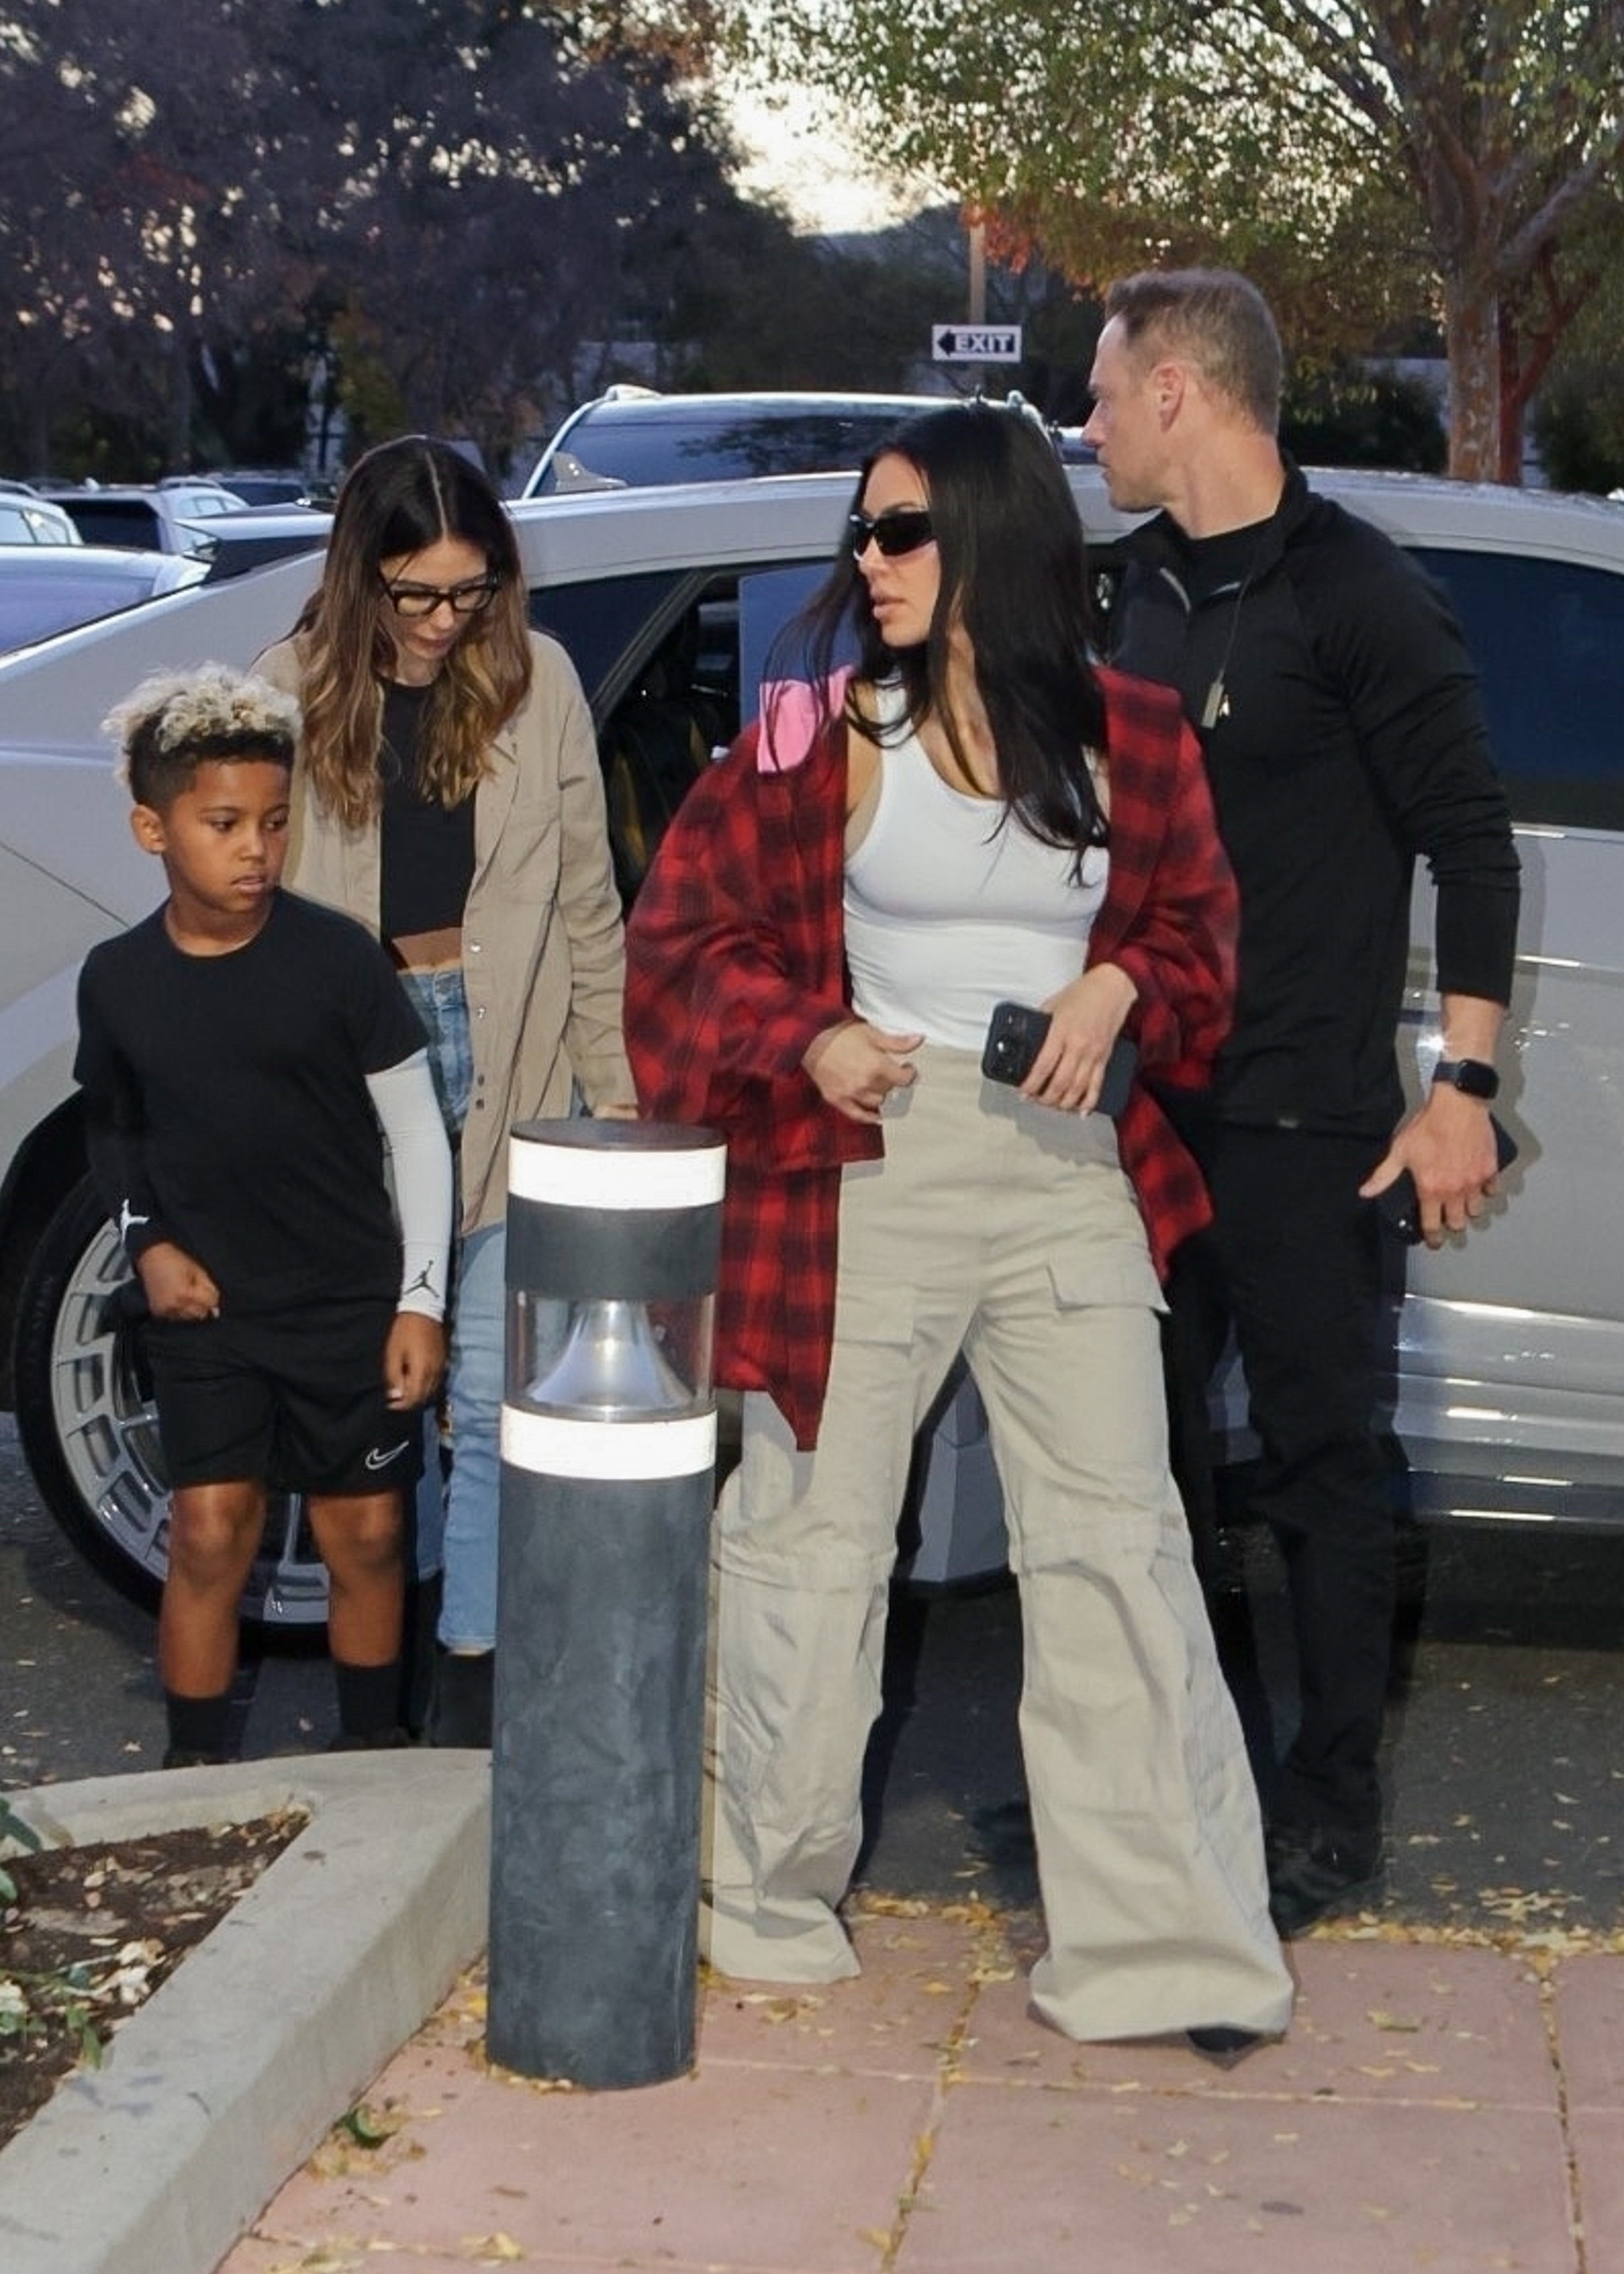 Kim claims she shields her children from their father's antics